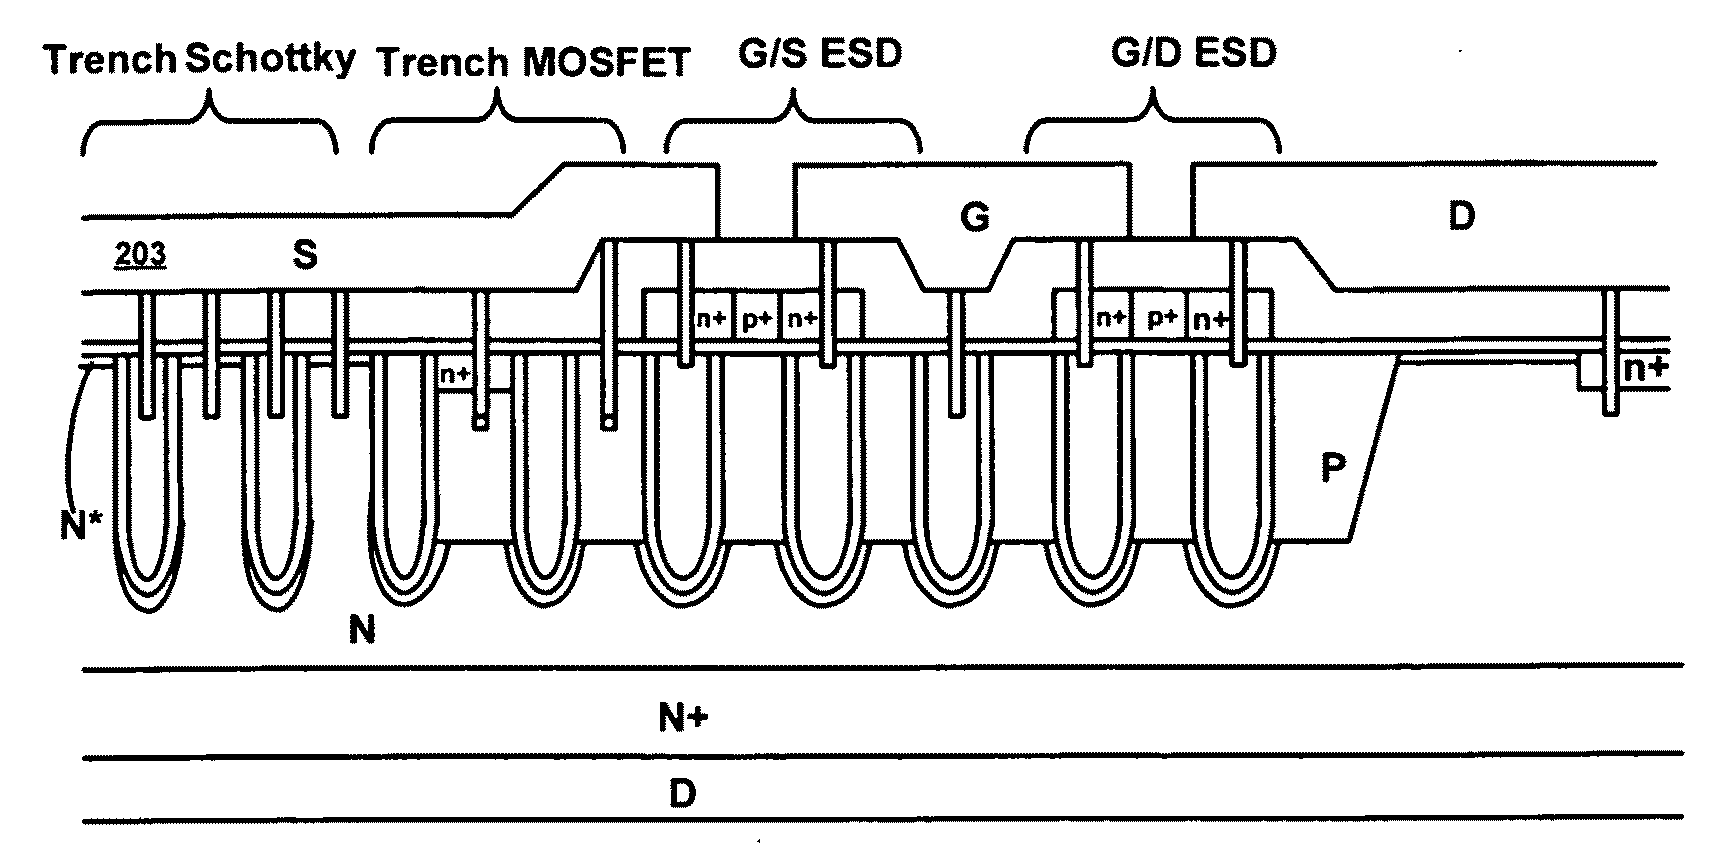 MSD integrated circuits with shallow trench